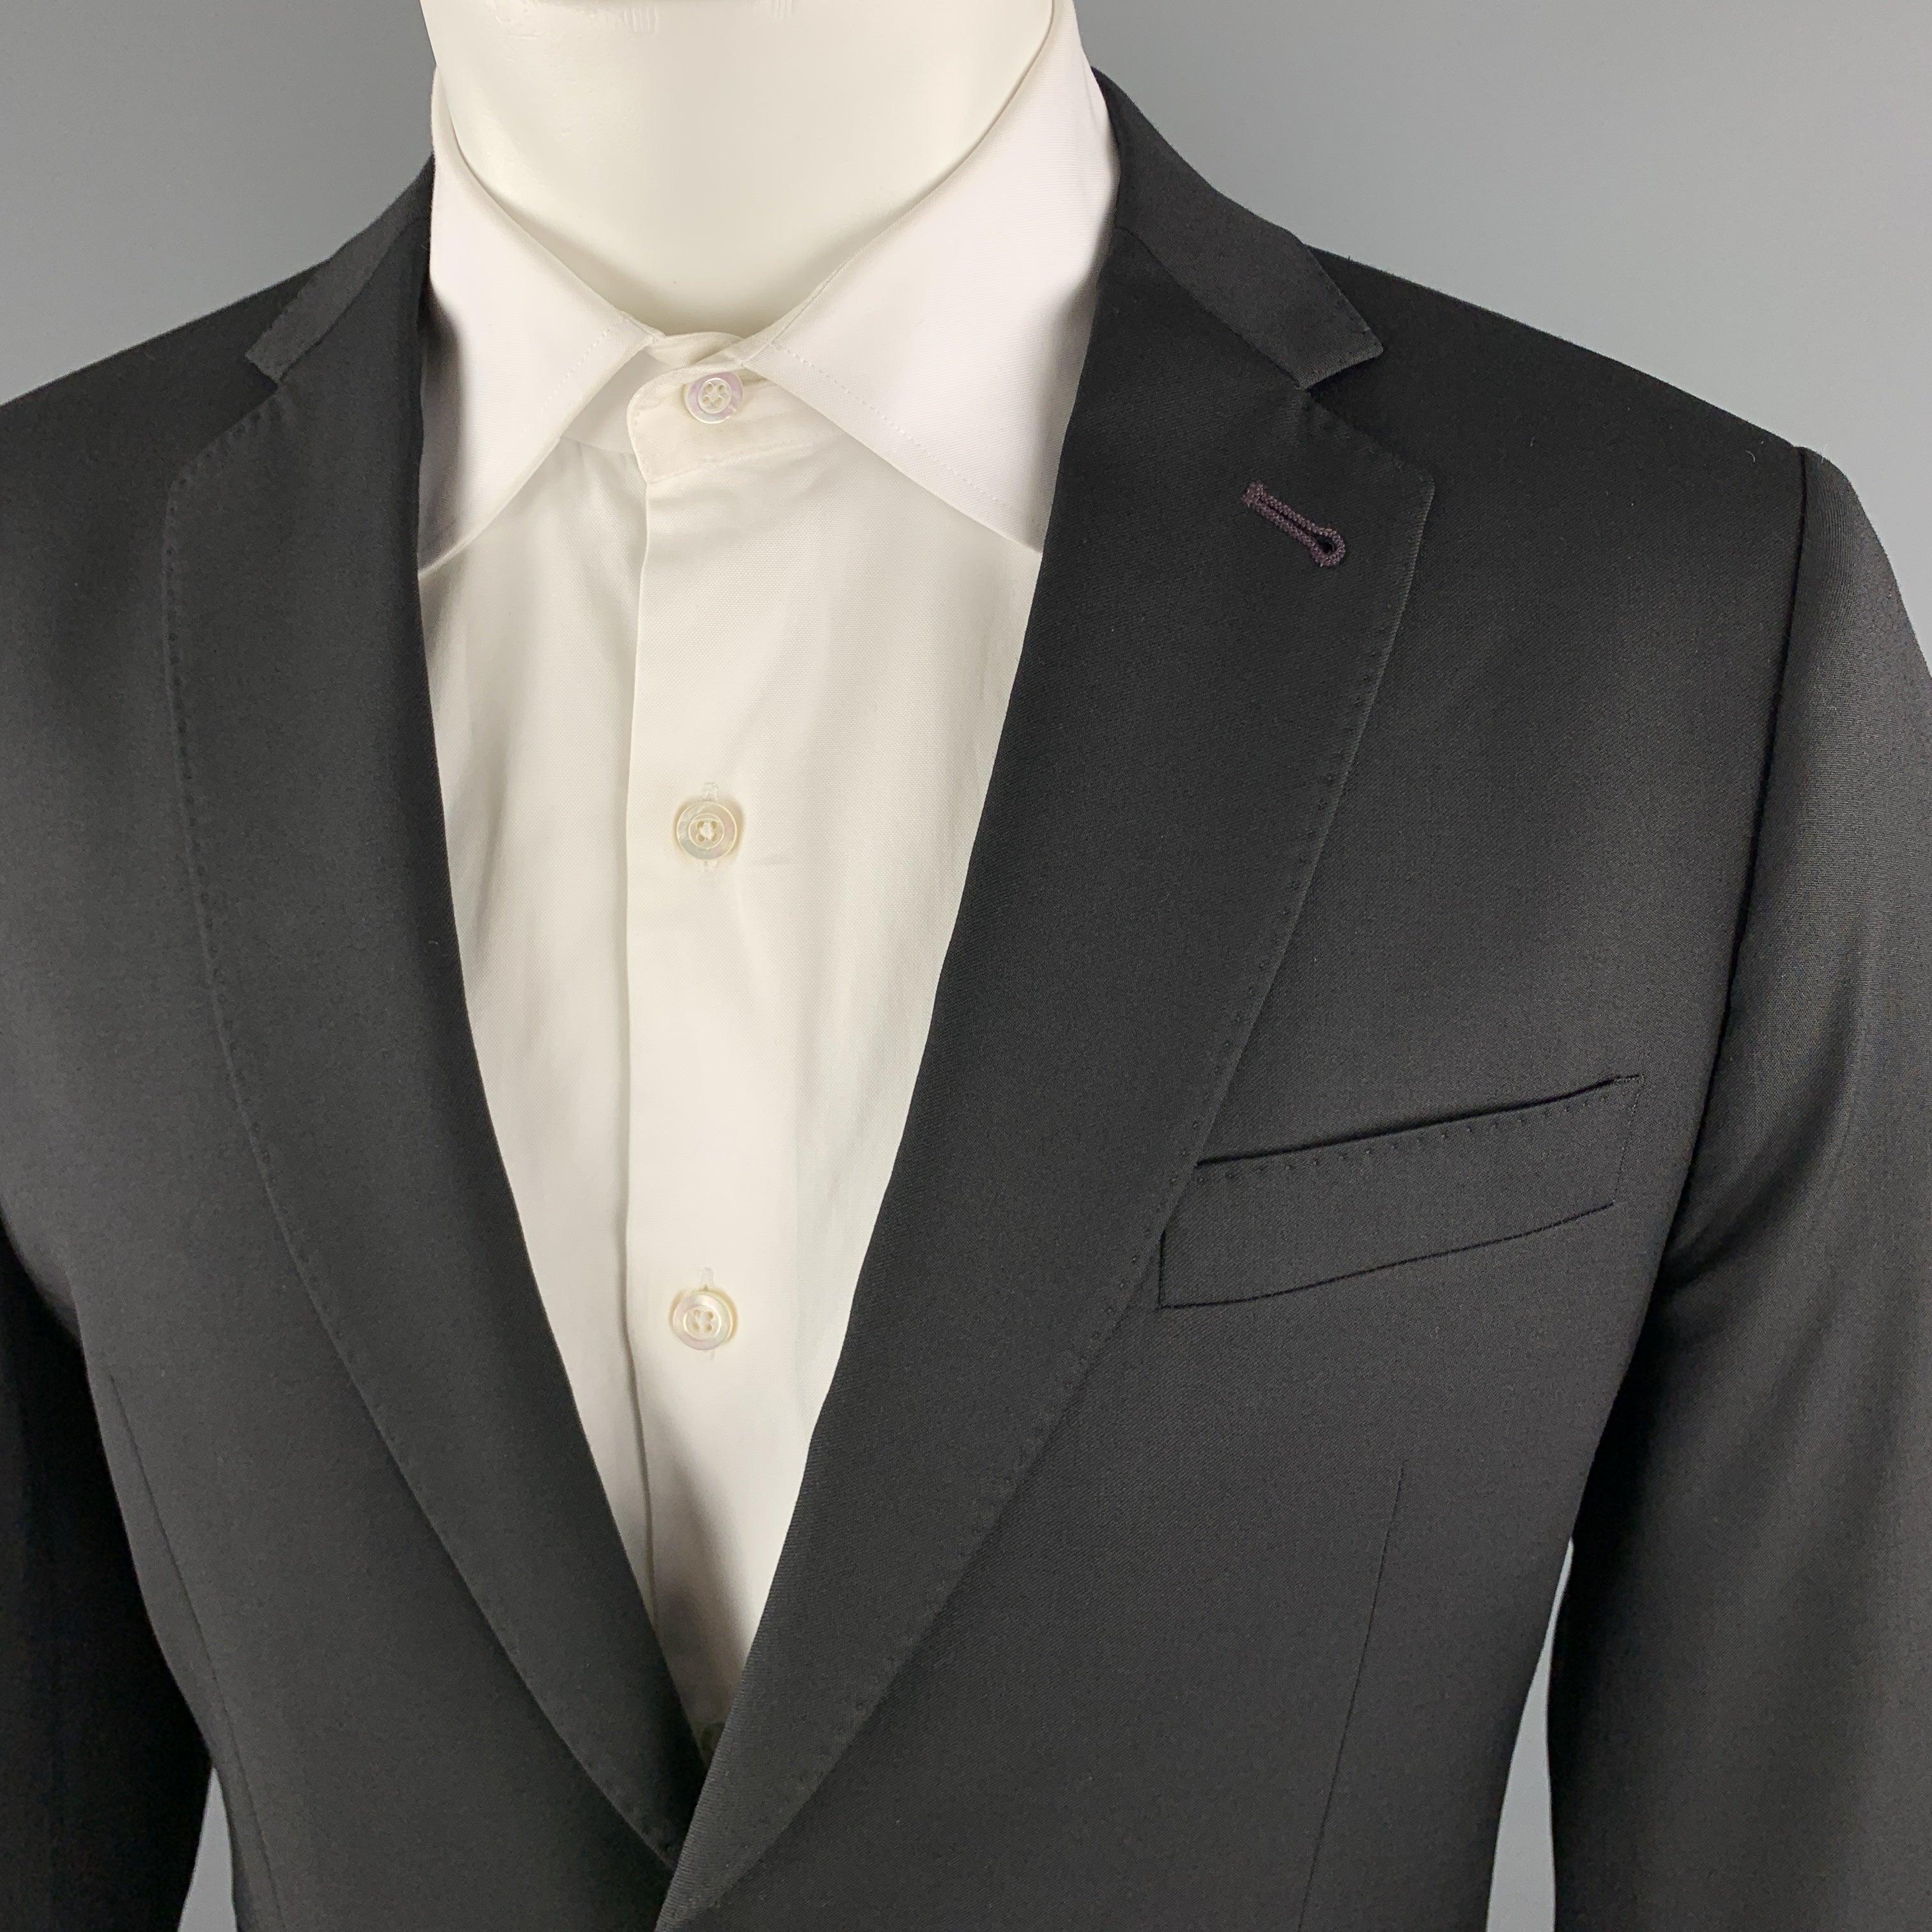 PAUL SMITH
sport coat comes in black wool twill with a top stitch notch lapel, single breasted, two button front, functional button cuffs, and purple contrast button holes. Made in Italy.Excellent Pre-Owned Condition. 

Marked:   42 

Measurements: